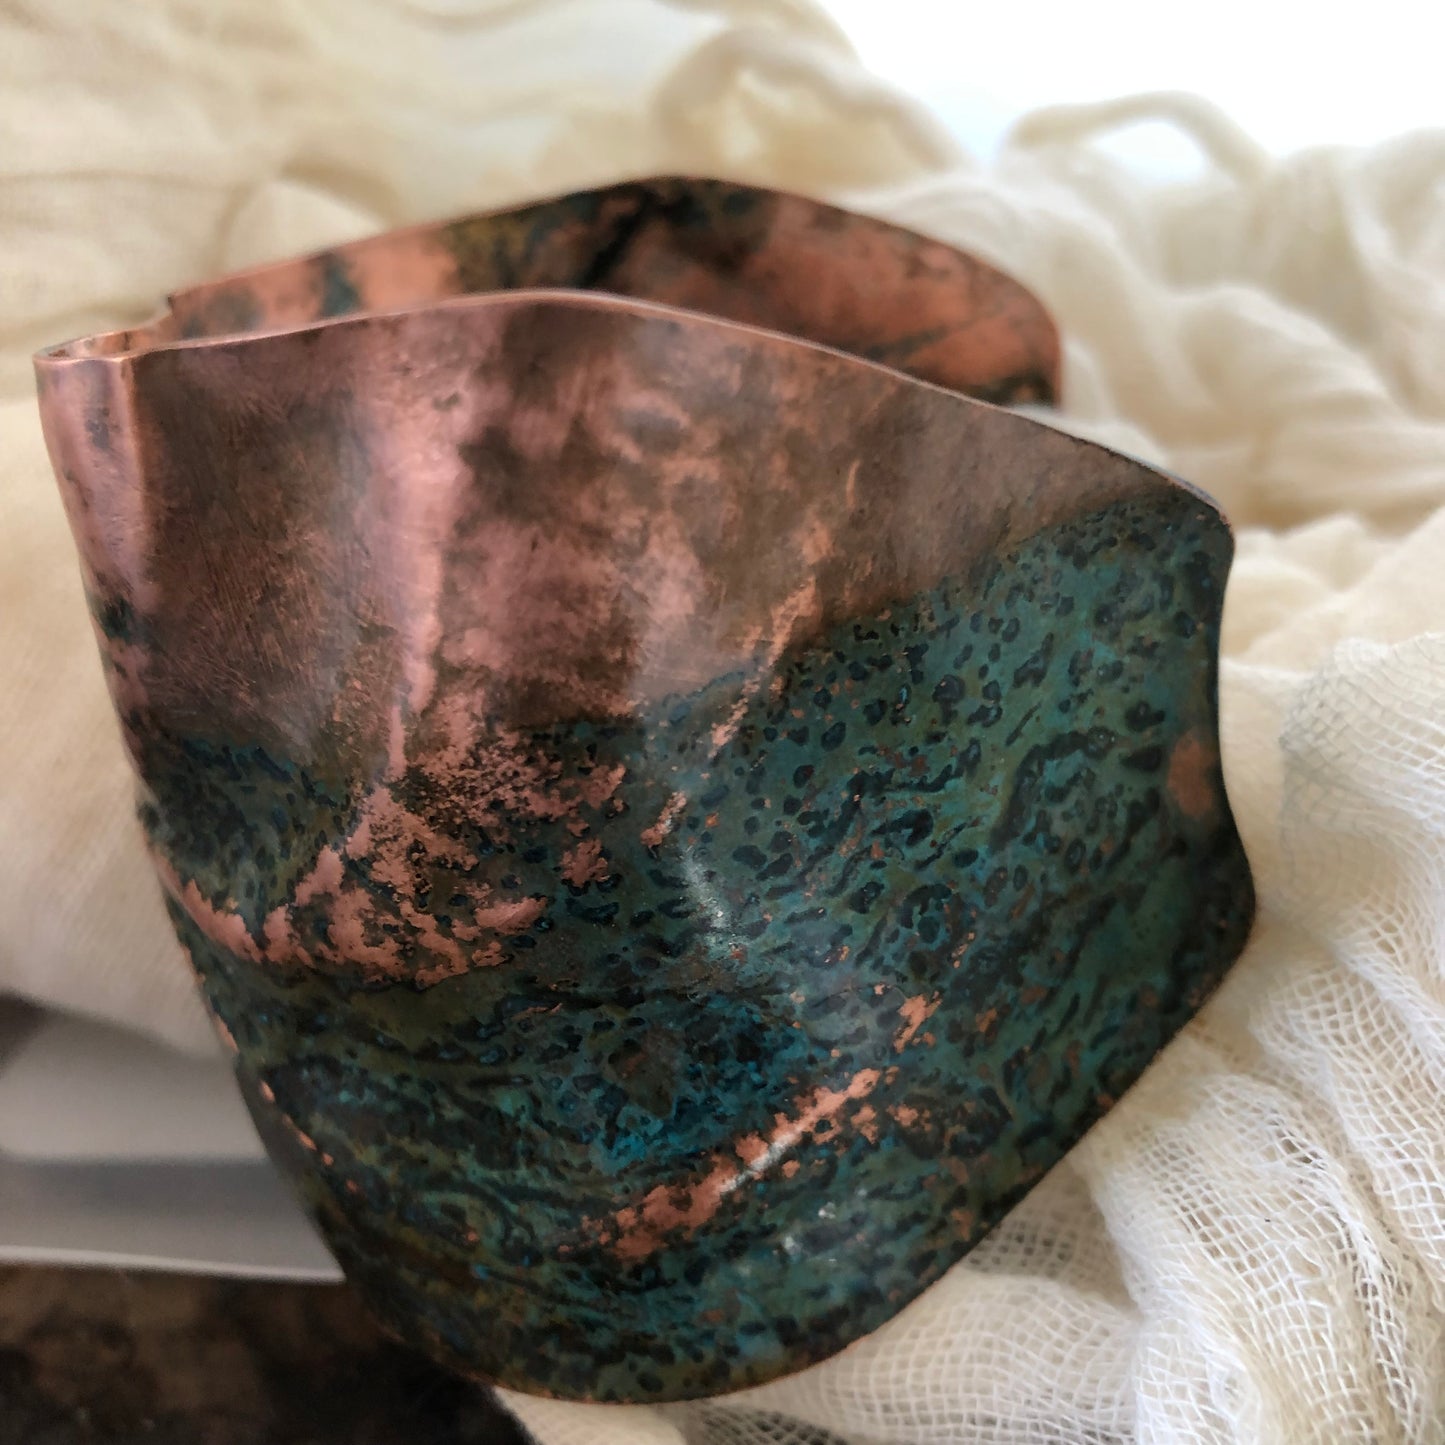 Pinwheel cuff bracelet in chased and repoussé copper with blue and green patina